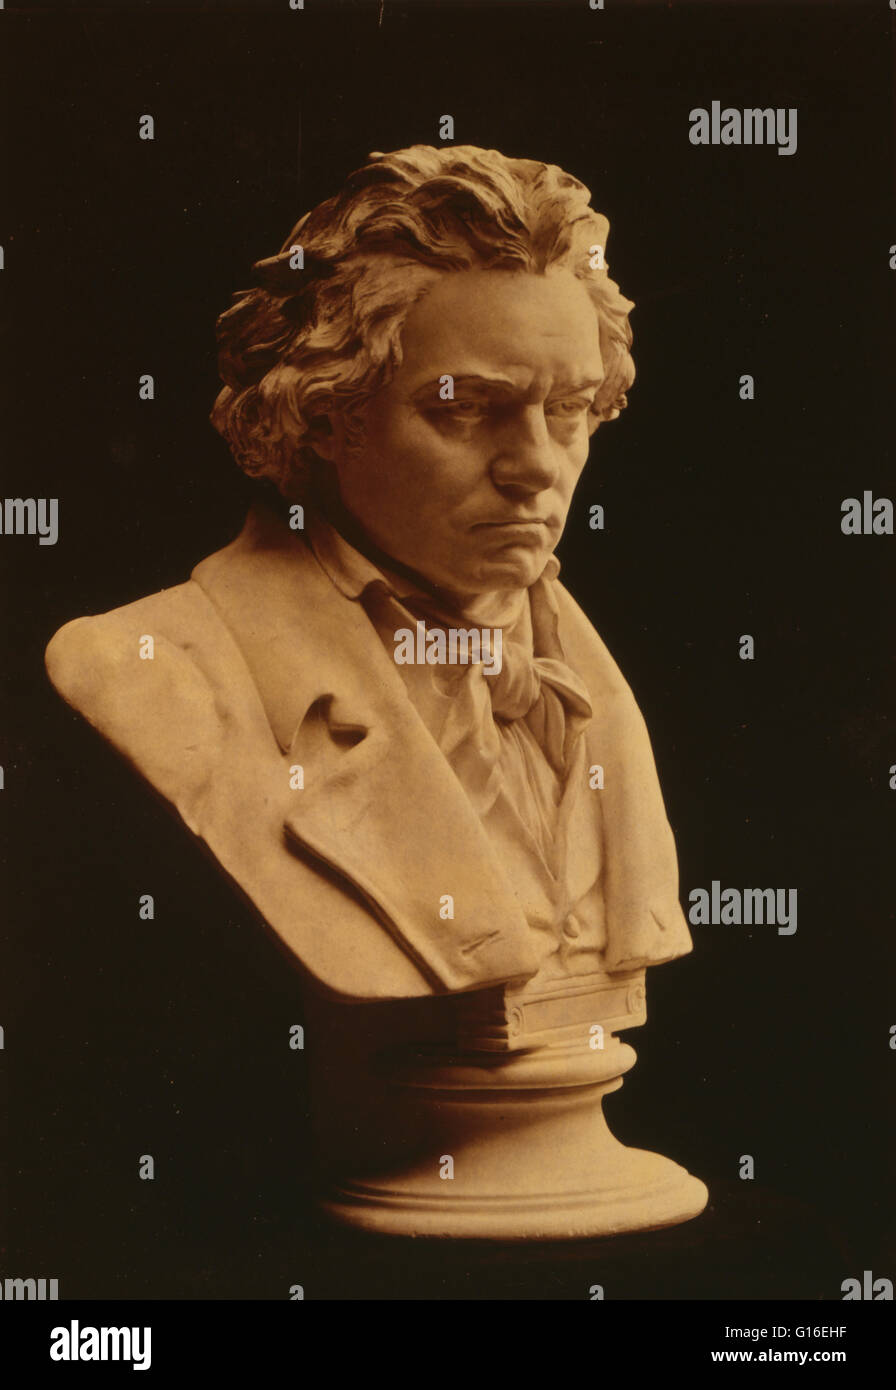 Bust statue by Hugo Hagen, based on life mask by Franz Klein done in 1812. Ludwig van Beethoven (baptized December 17, 1770 - March 26, 1827) was a German composer and pianist. A crucial figure in the transition between the Classical and Romantic eras in Stock Photo